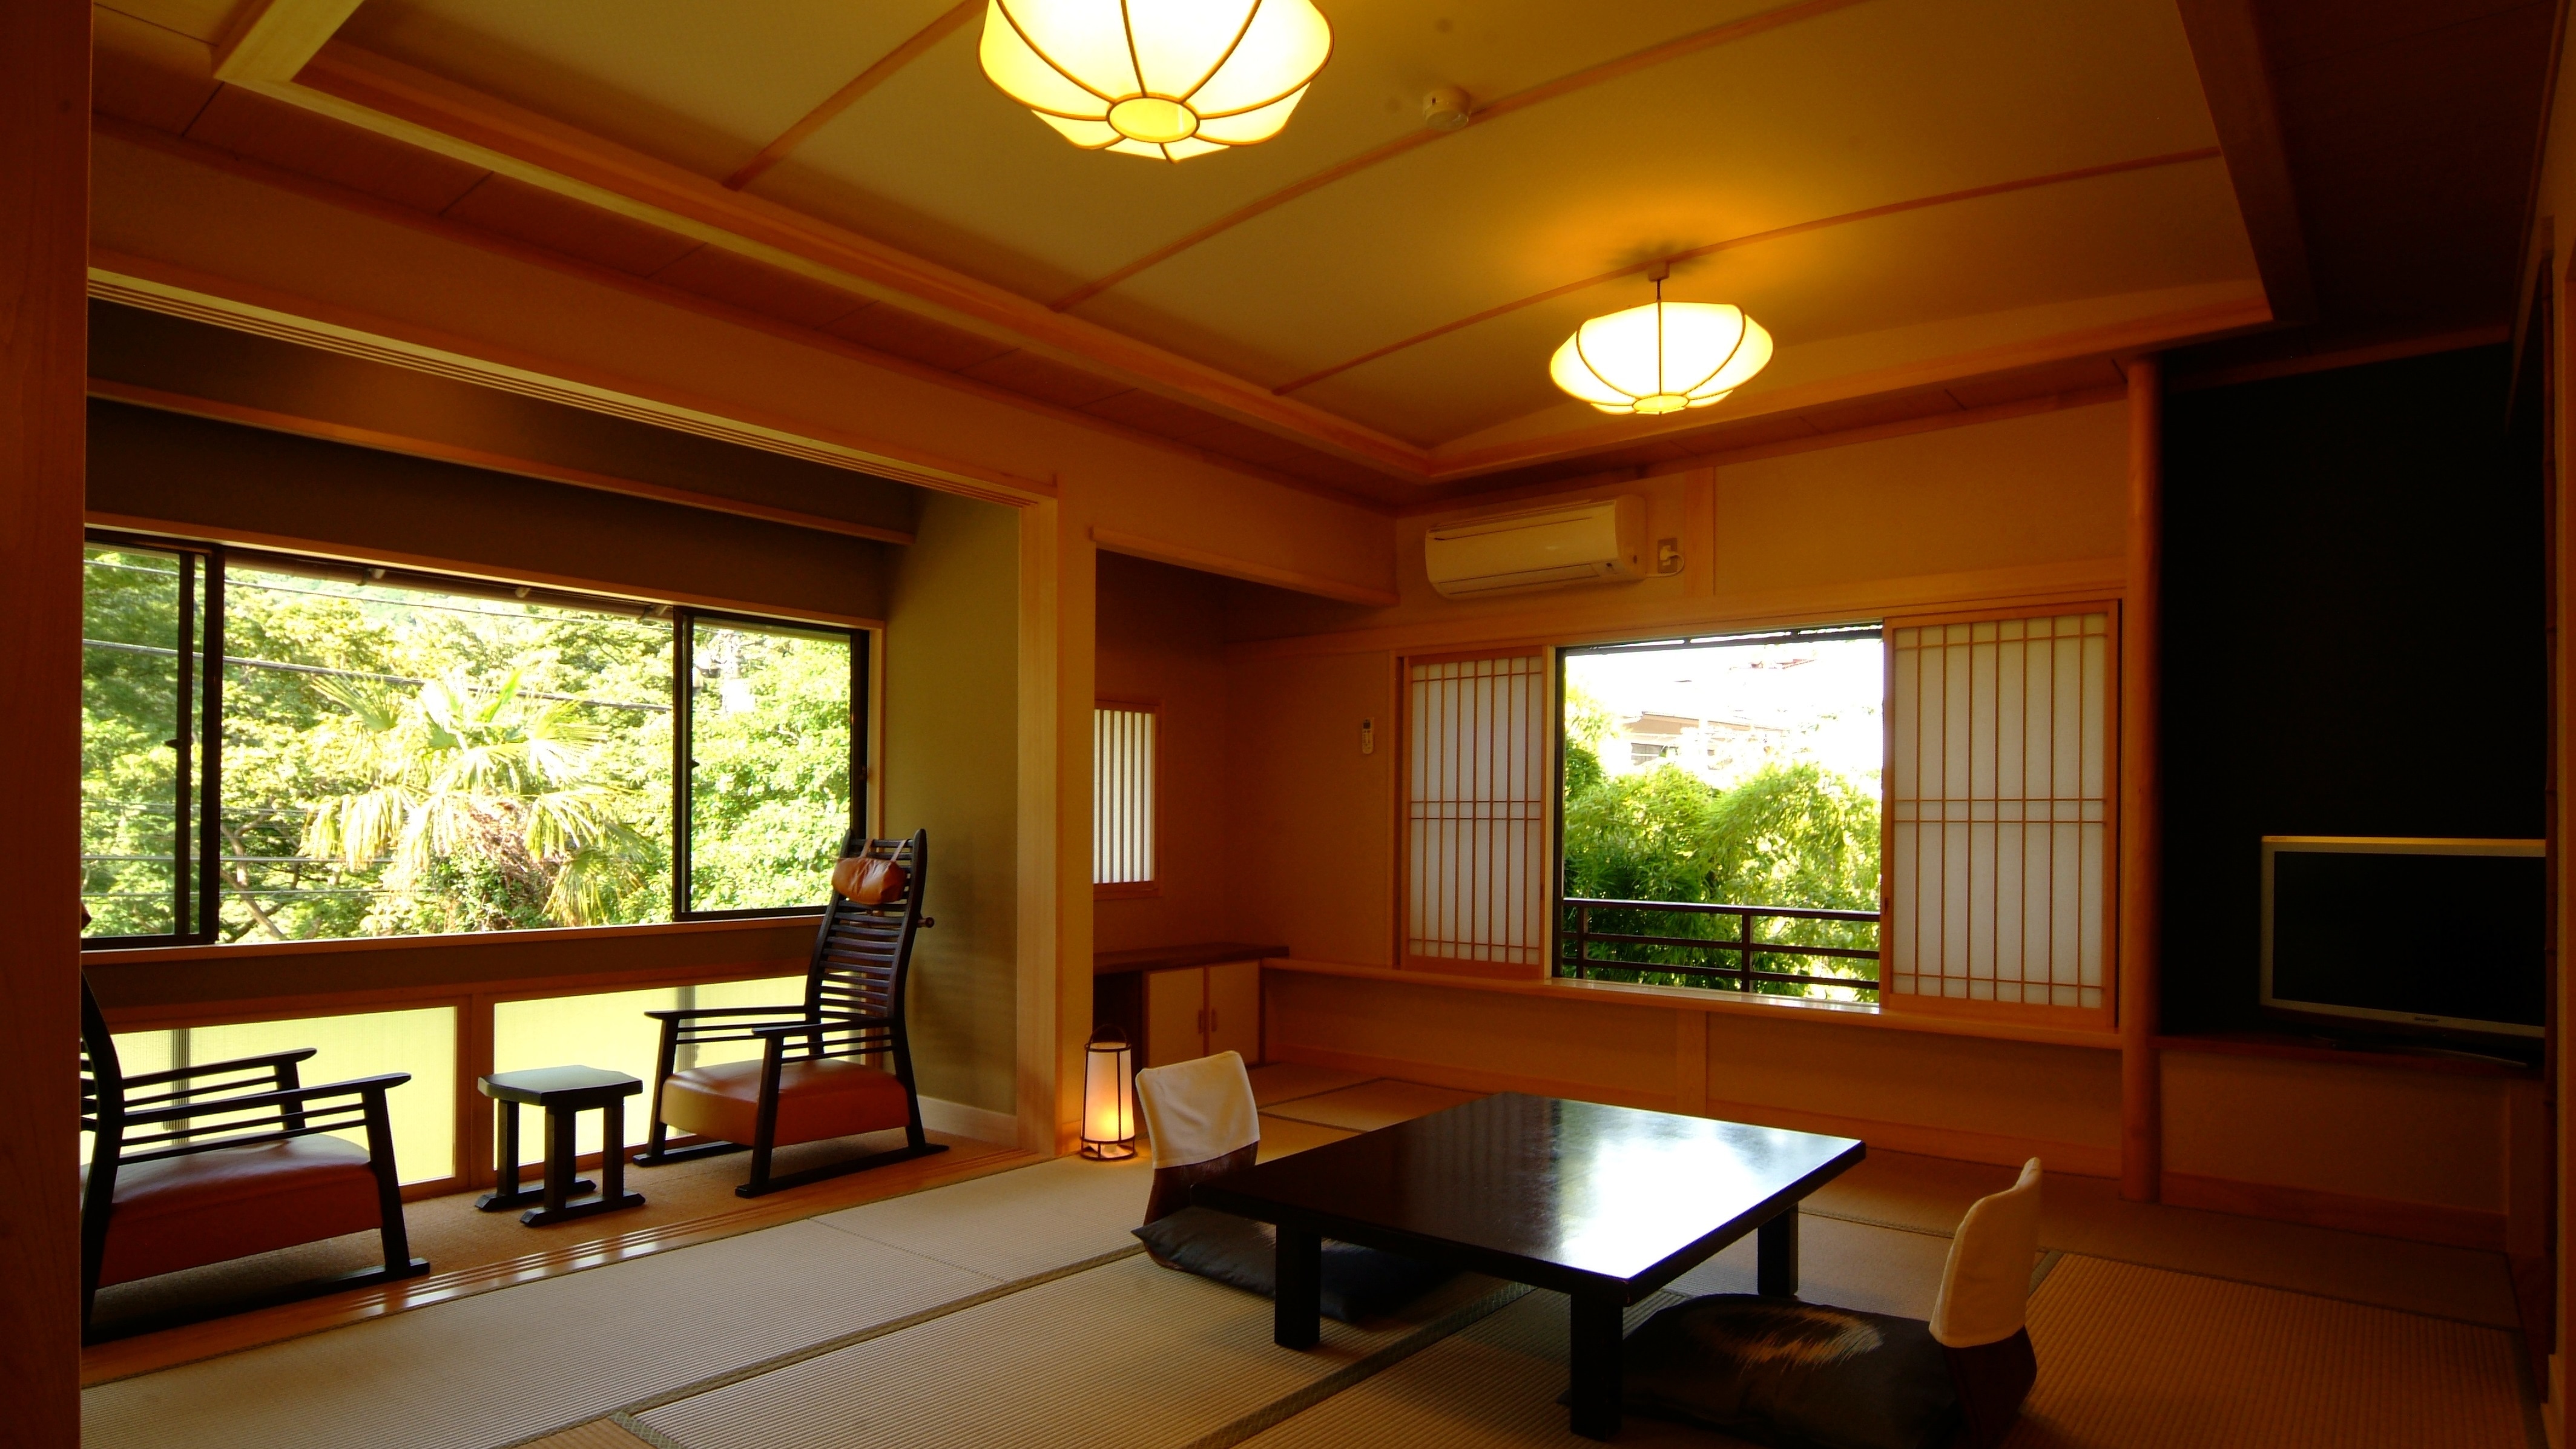 10 tatami room with wide veranda "Rhododendron flower"